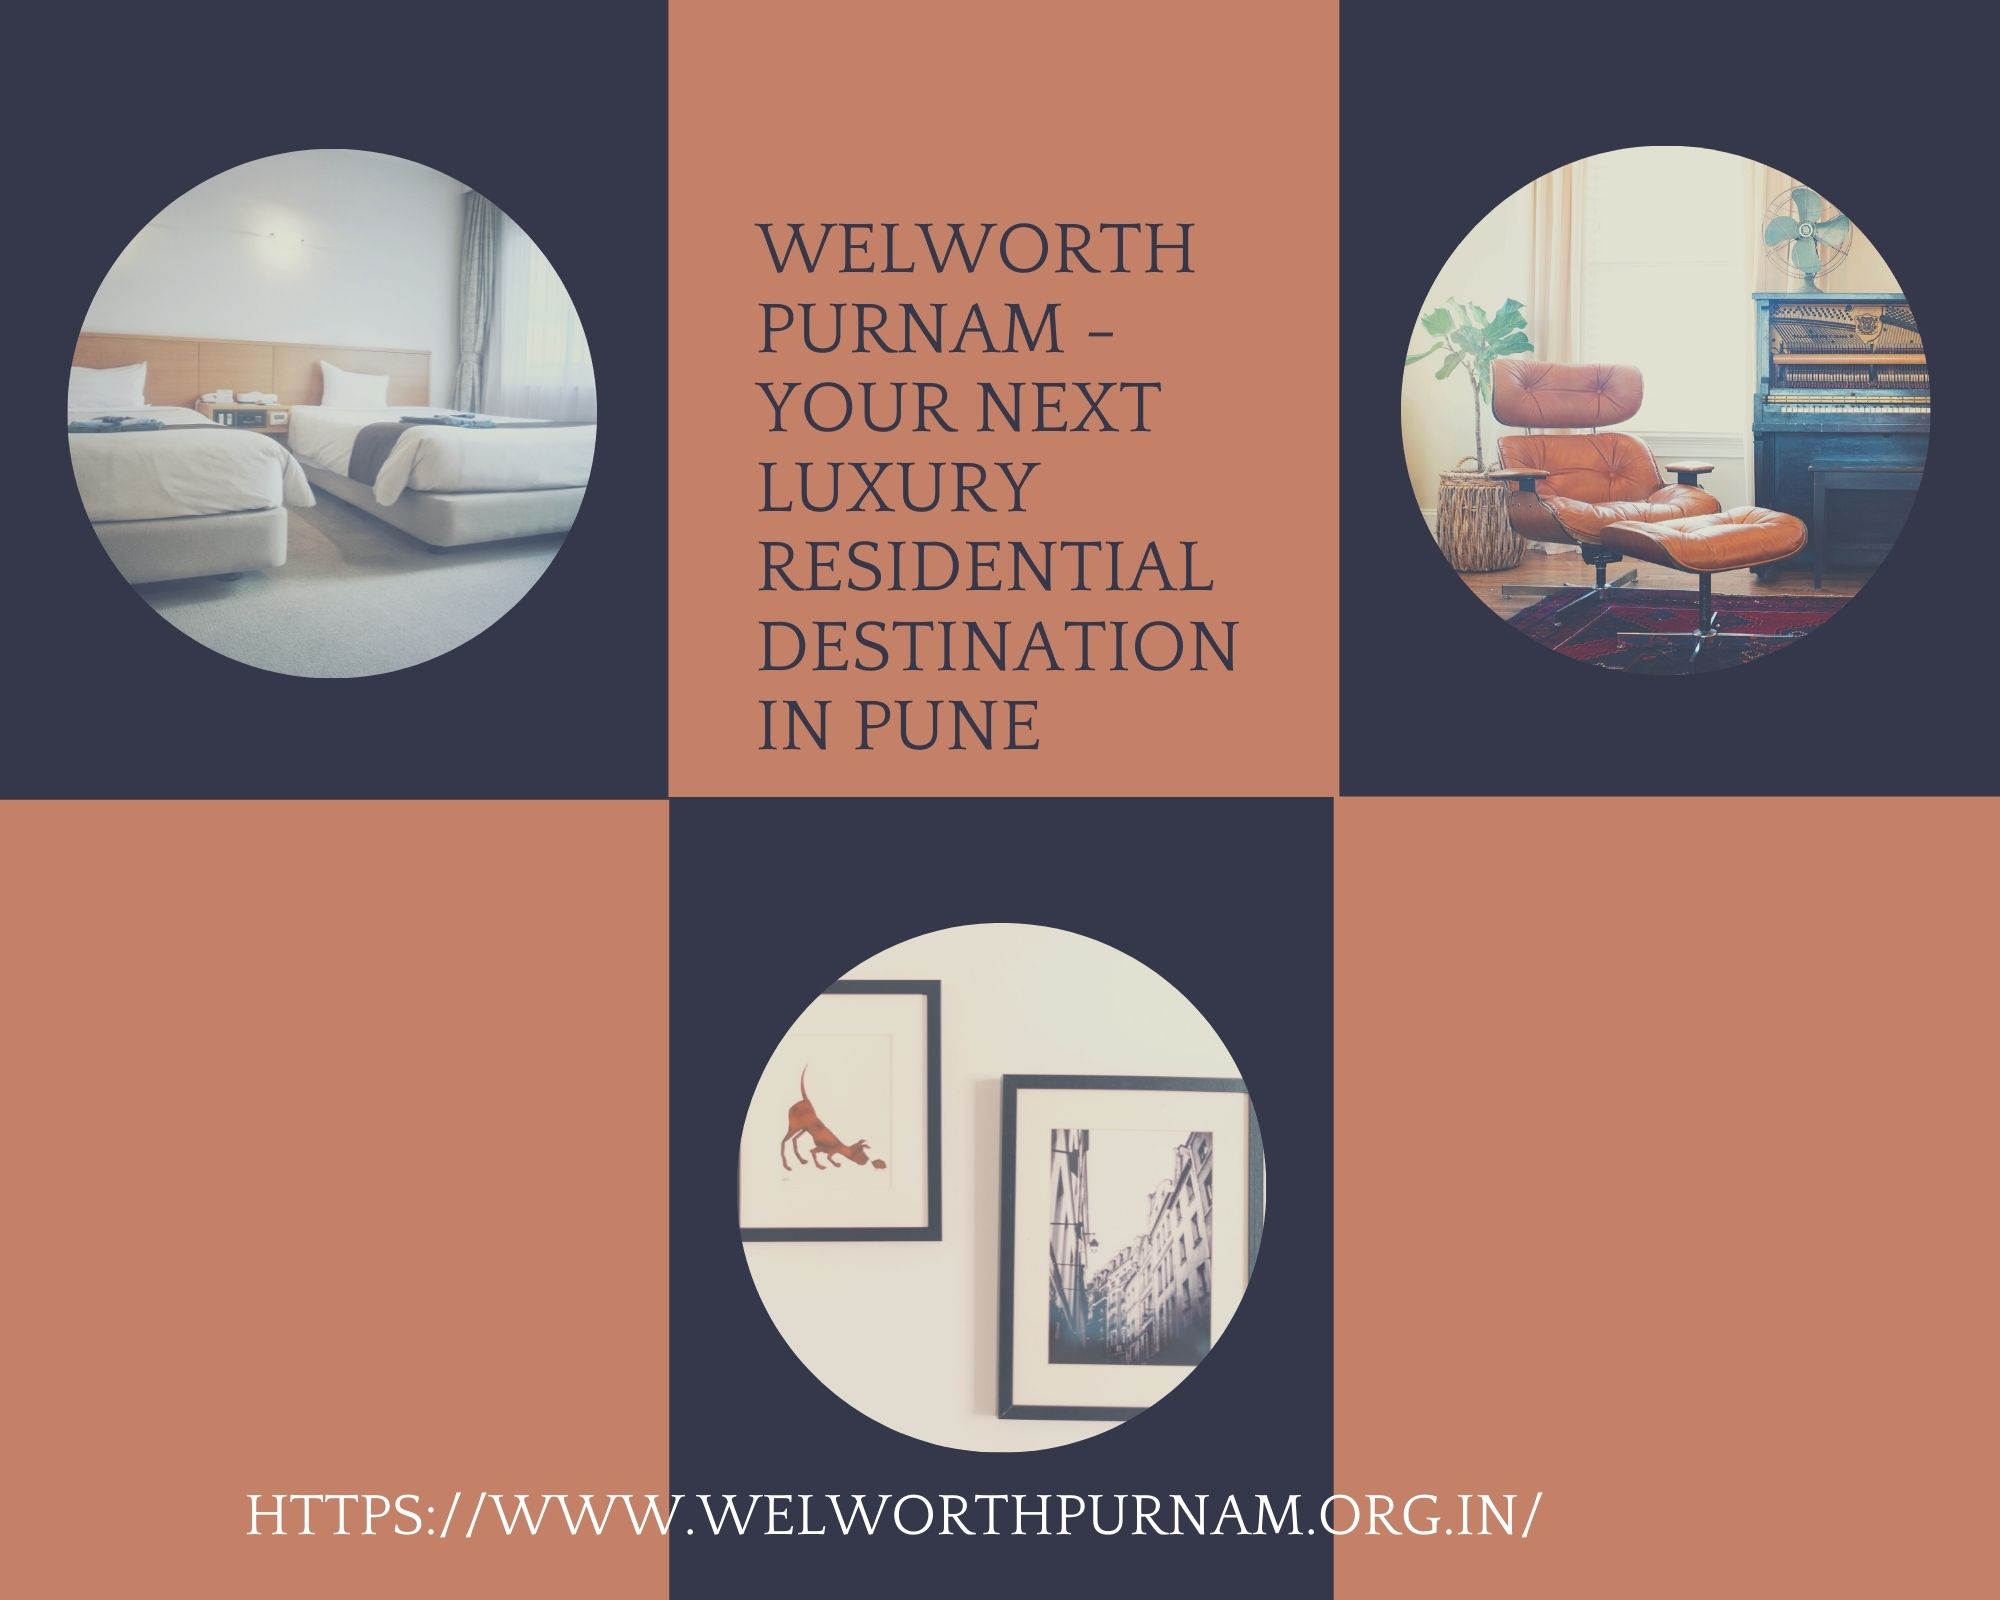 Welworth Purnam -your next luxury residential destination in Pune